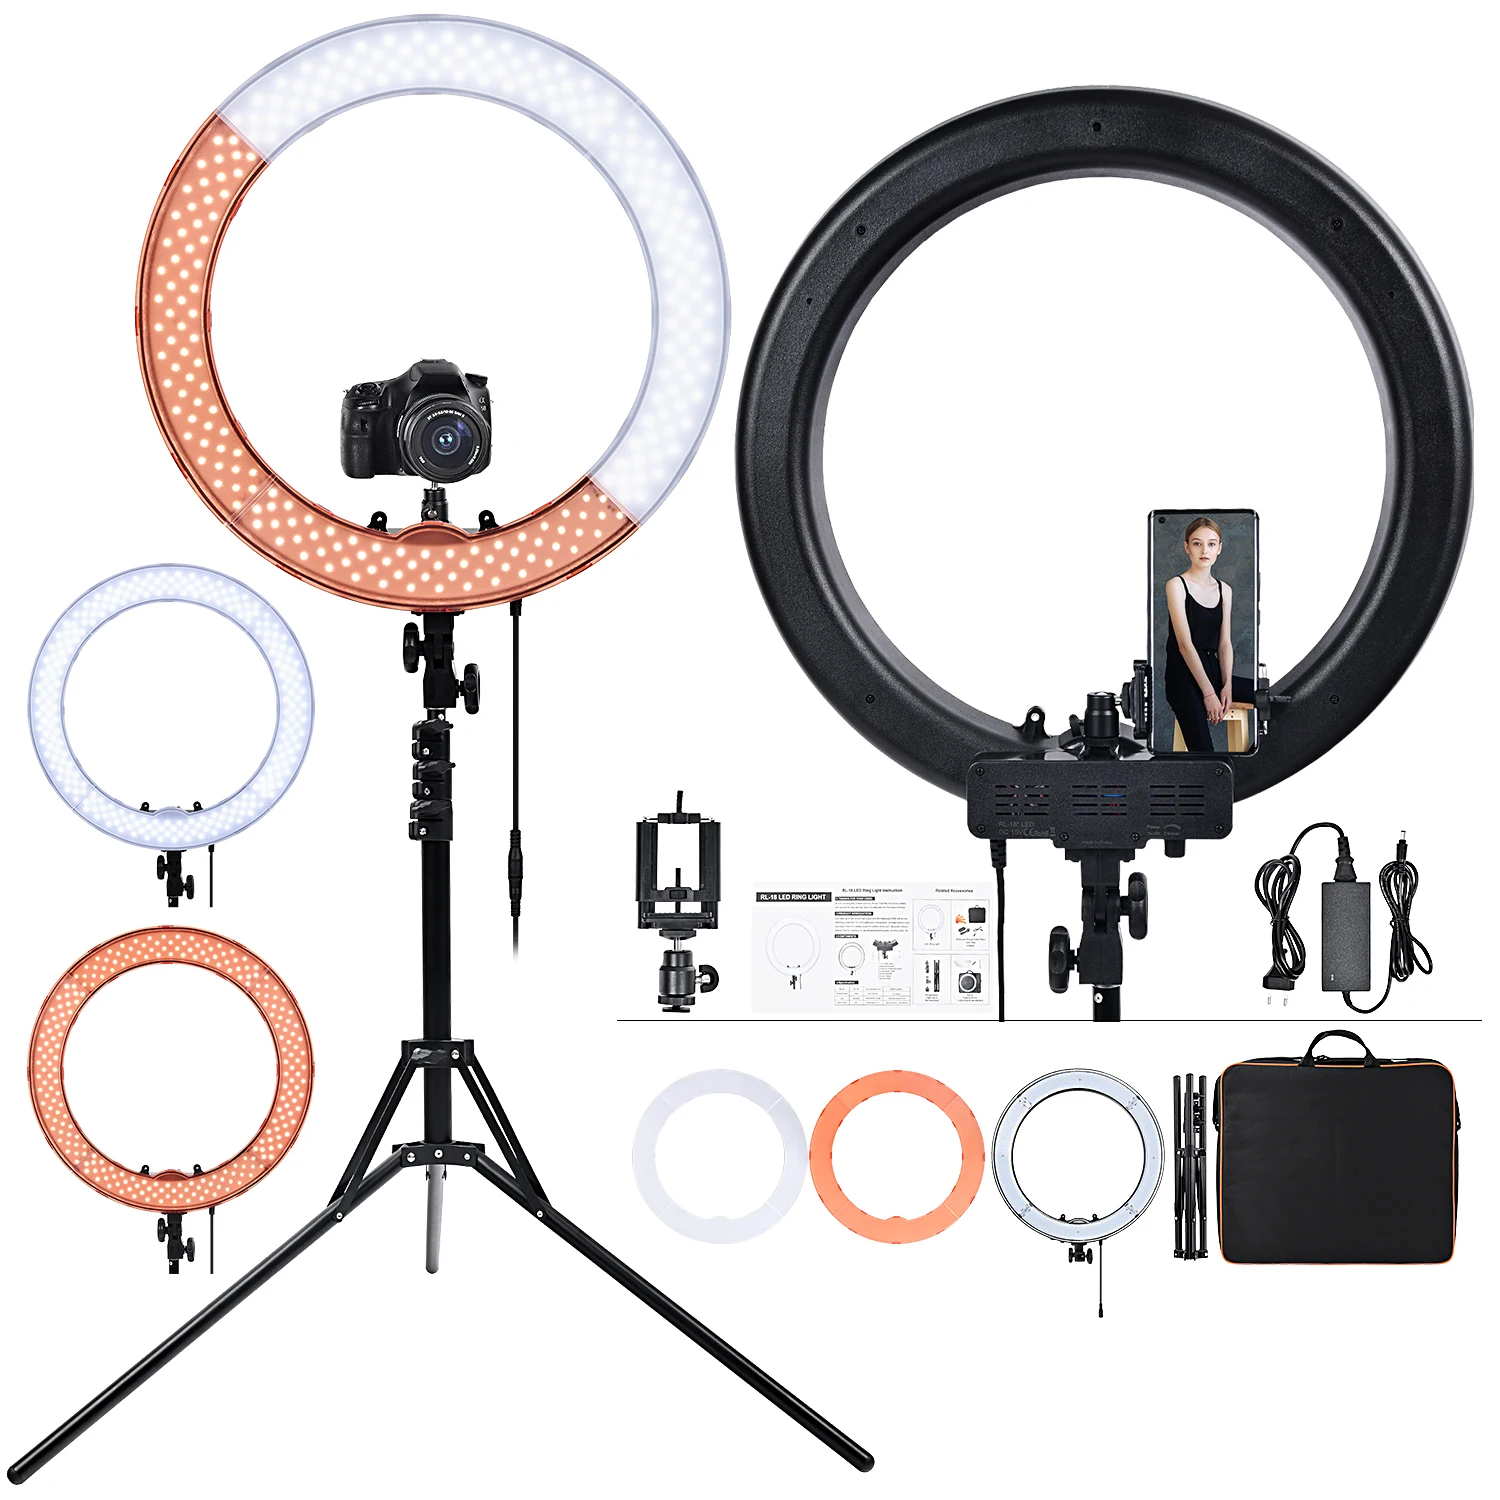 

FOSOTO RL-18 Selfie Led Ring Flash Light Rechargeable Lamp Camera Lighting Equipment Led Video Shooting With Tripod Stand